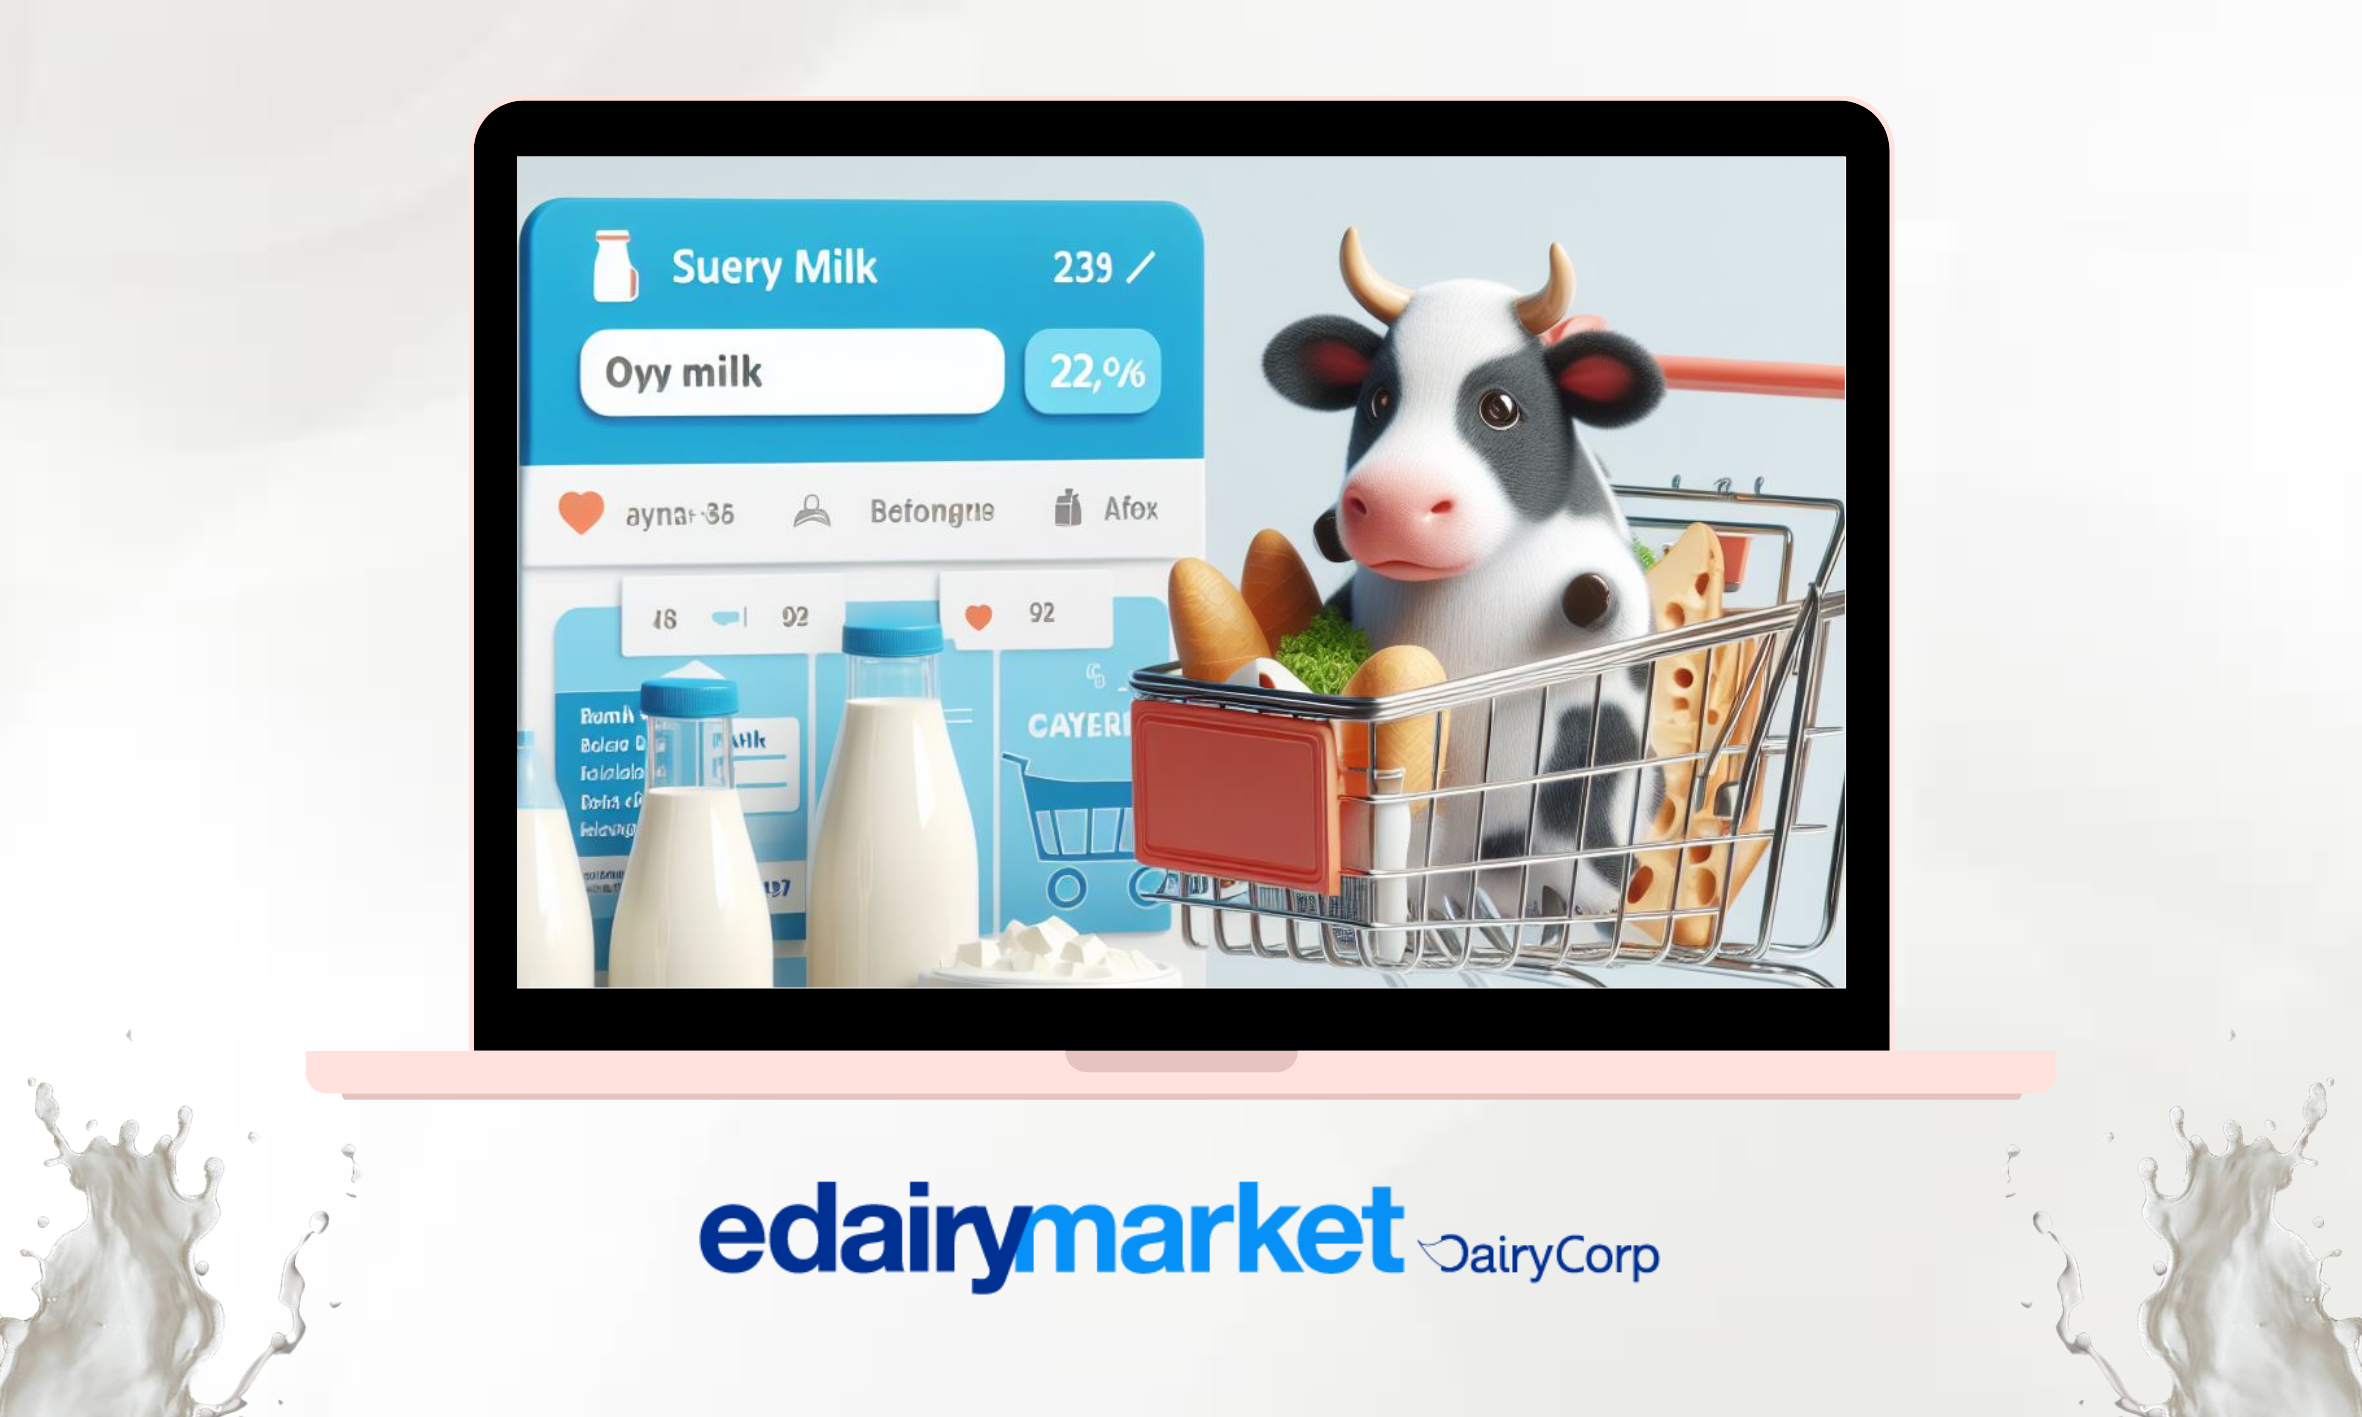 Create your online store on eDairy Market and take advantage of its great benefits.